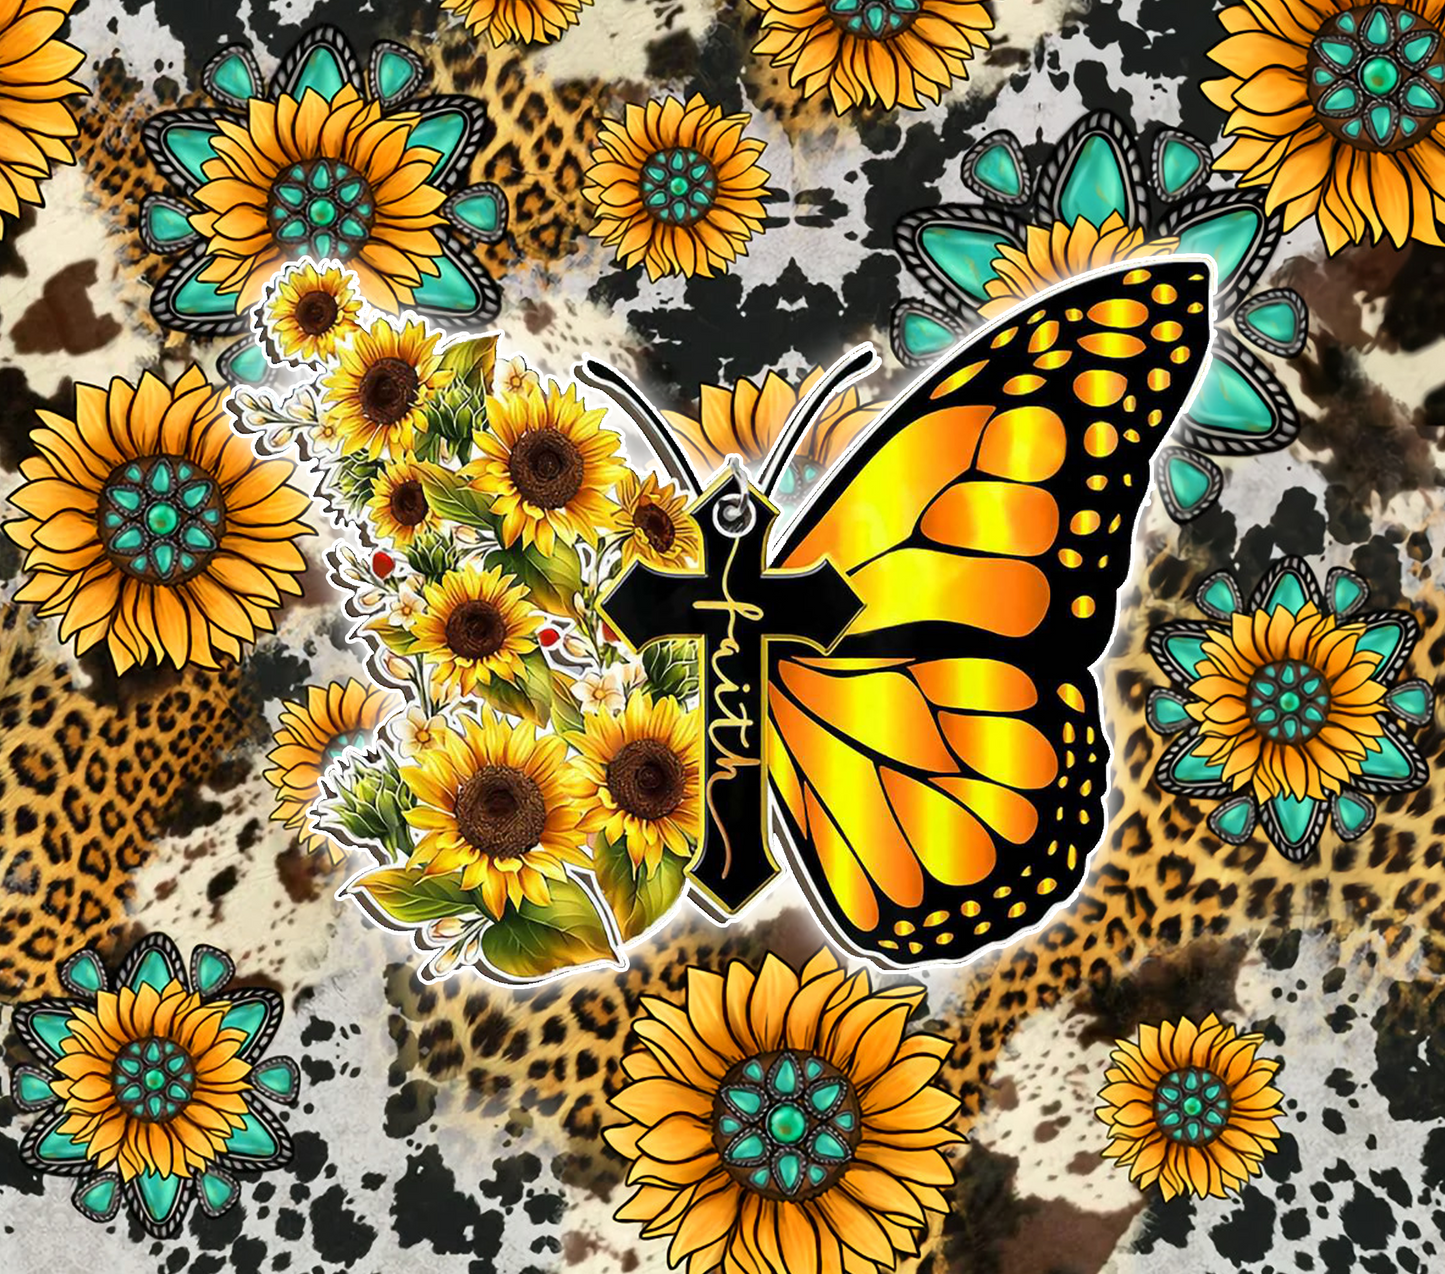 Sunflower Butterfly - 20 Oz Sublimation Transfer